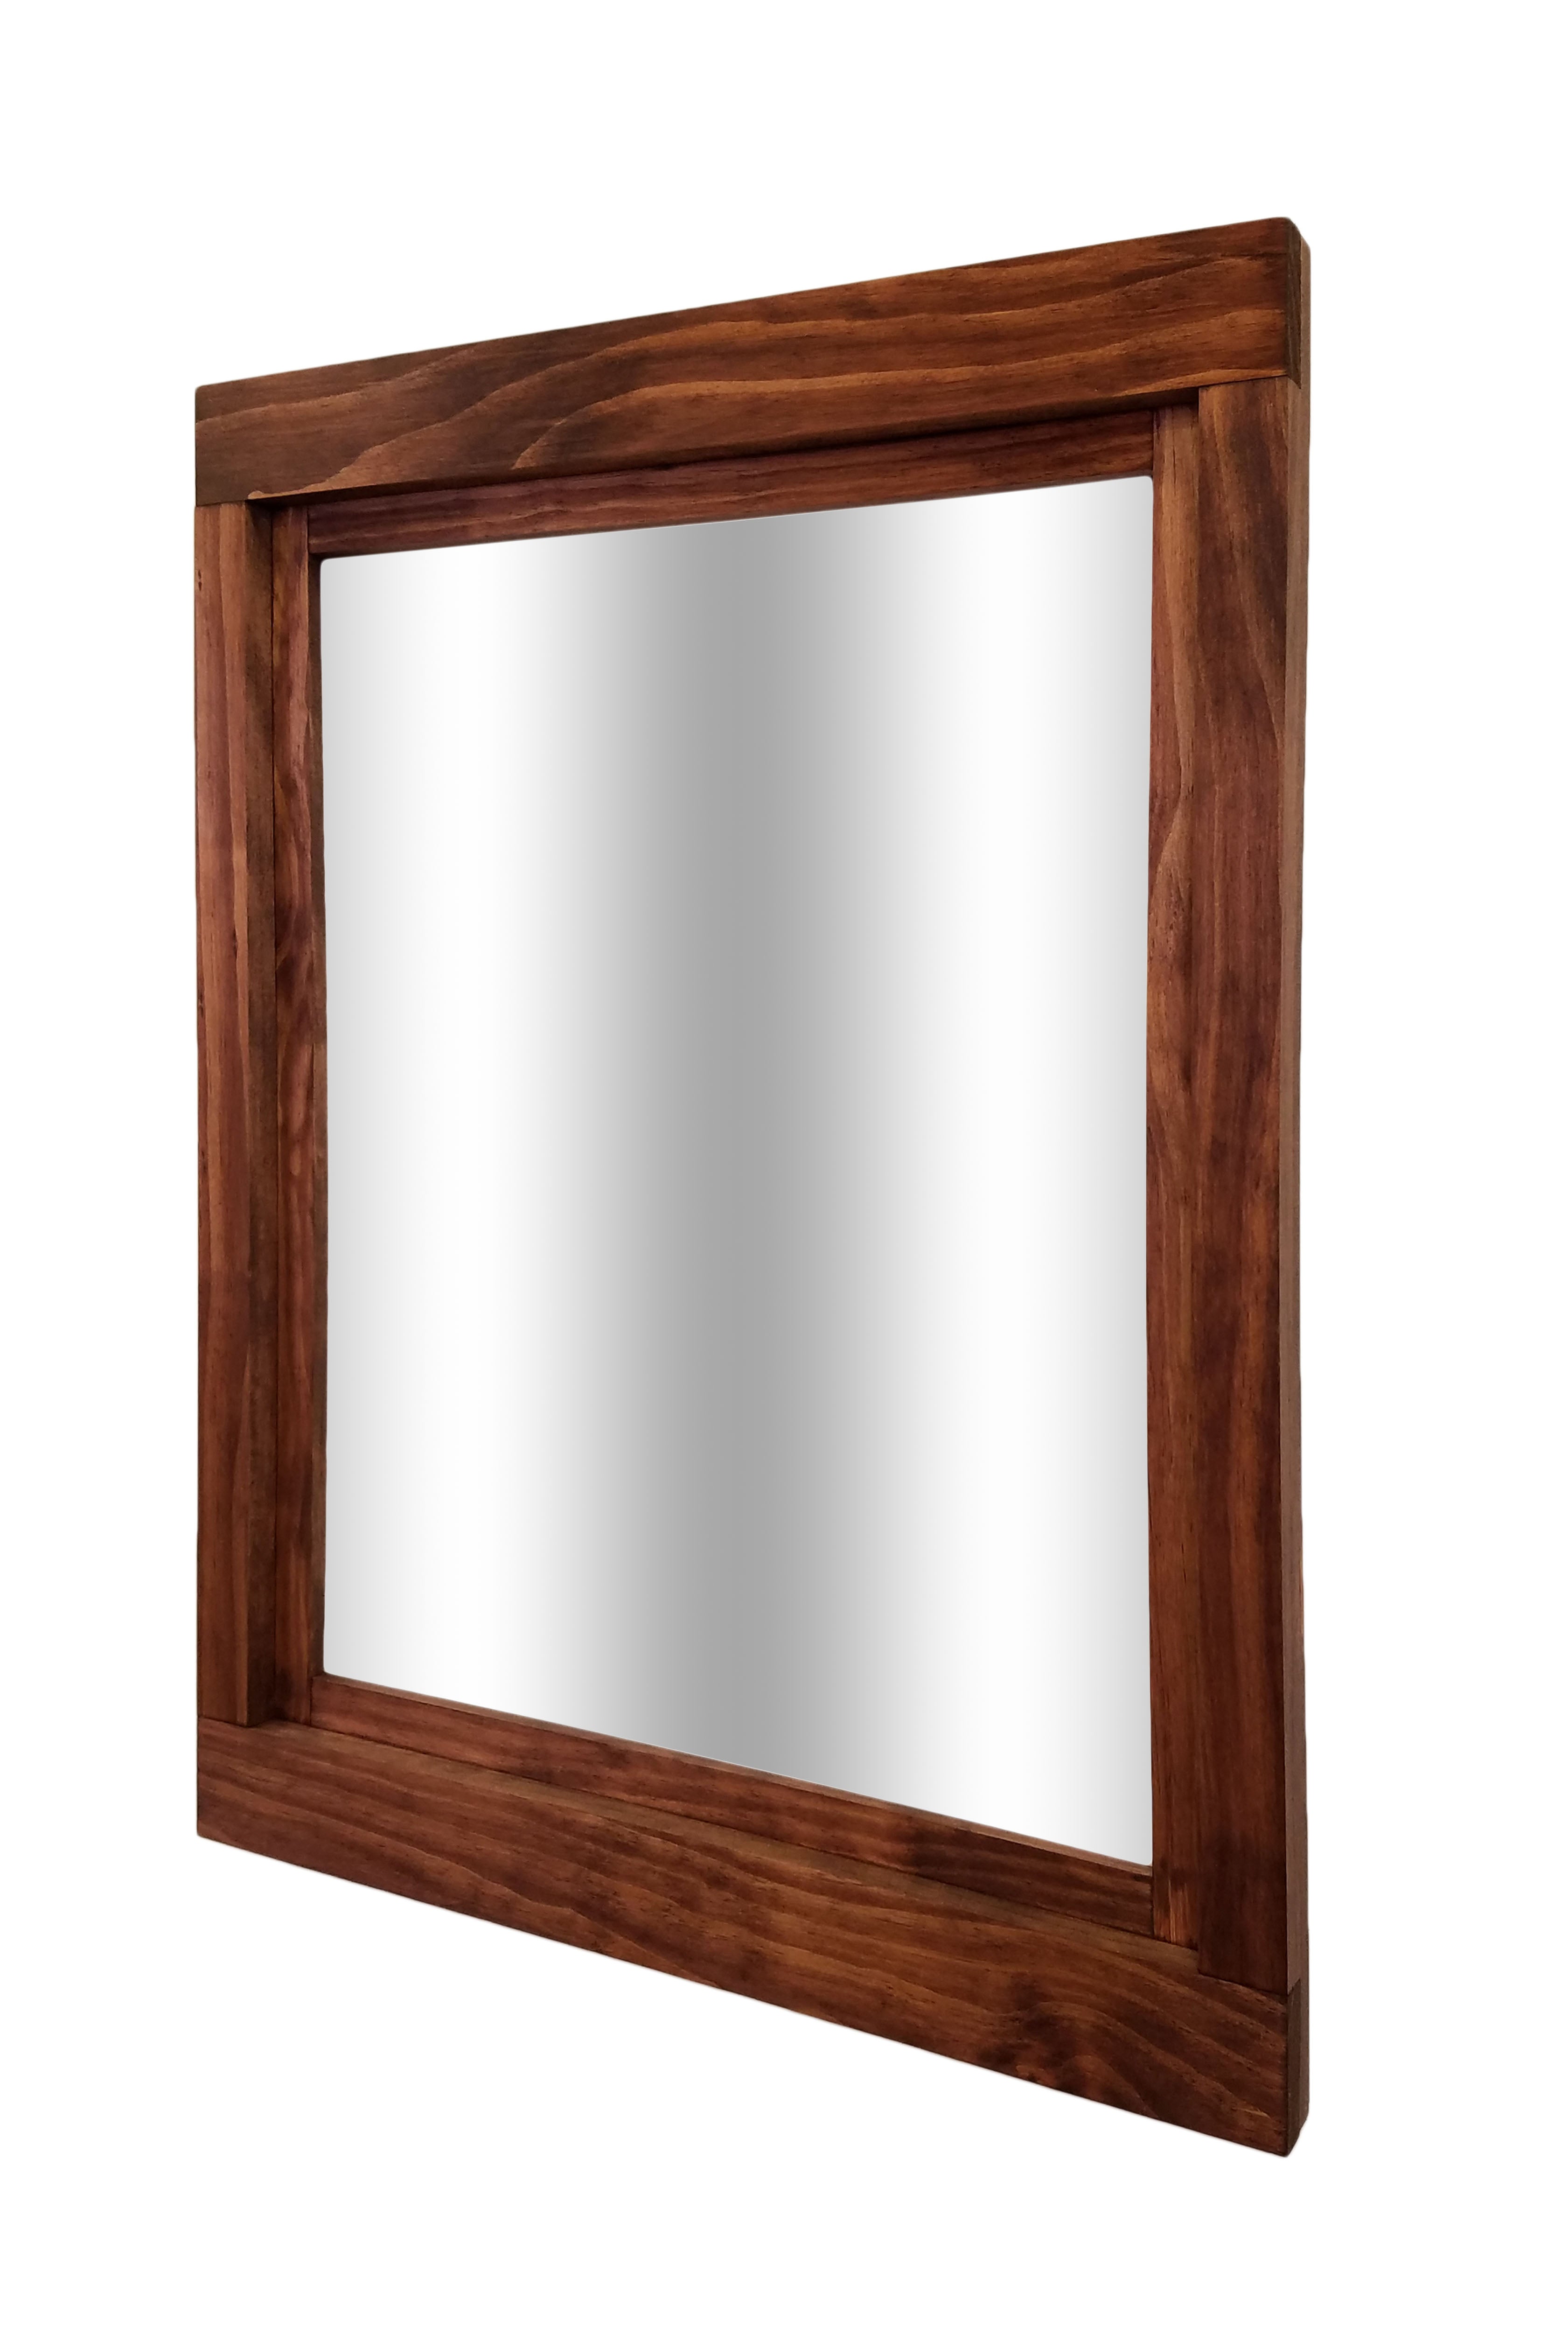 Farmhouse Wood Framed Wall Mirror, 5 Sizes & 20 Colors, Shown in Red Oak